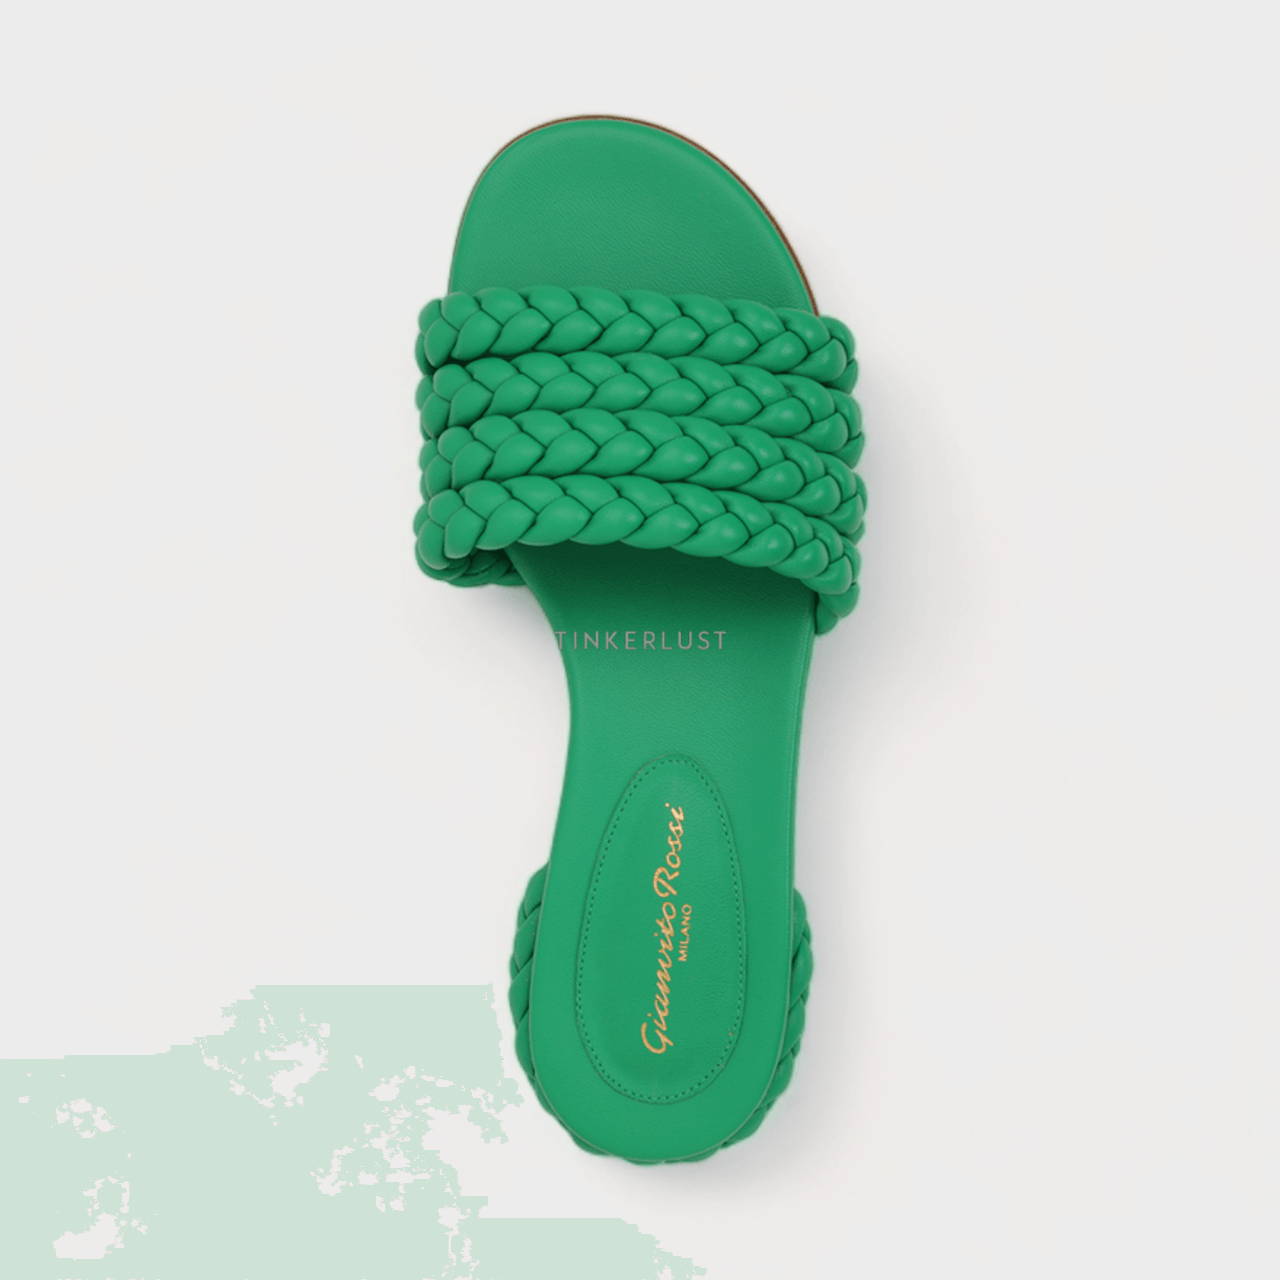 Gianvito Rossi Ischia Mules 20mm in Green Braided Nappa Leather Sandals